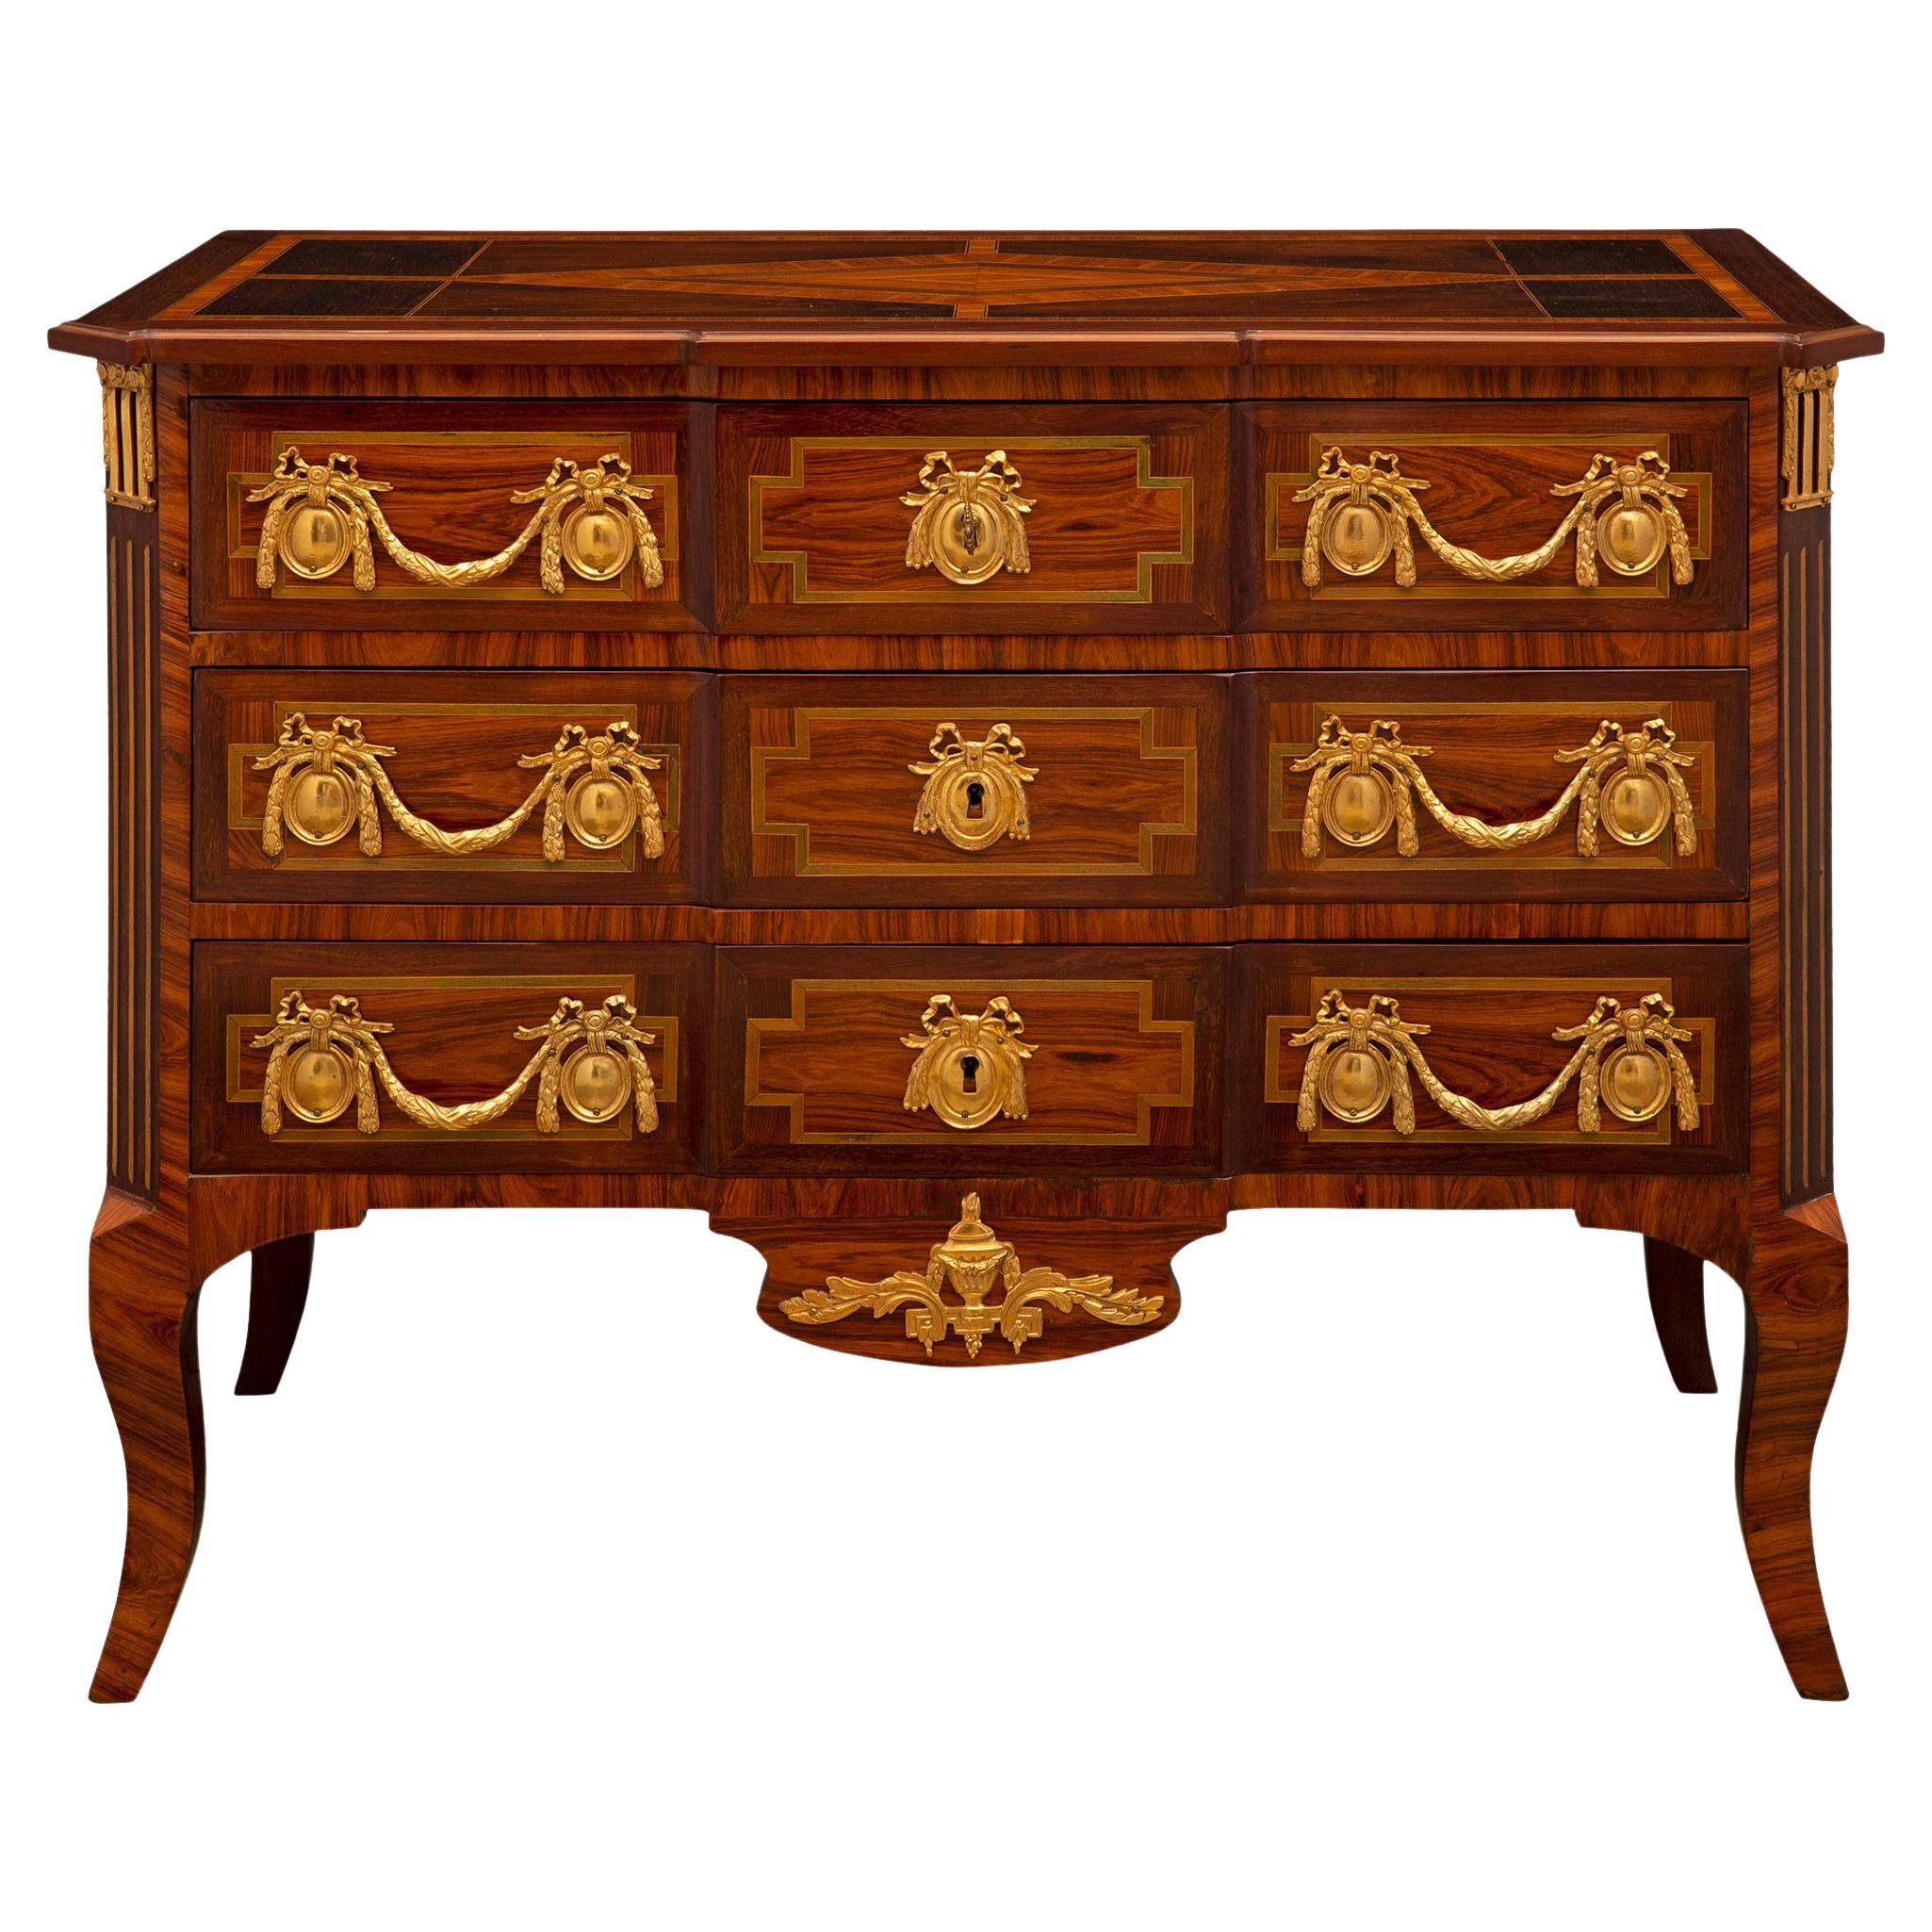 French 19th Century Transitional St. Kingwood, Tulipwood, and Ormolu Commode For Sale